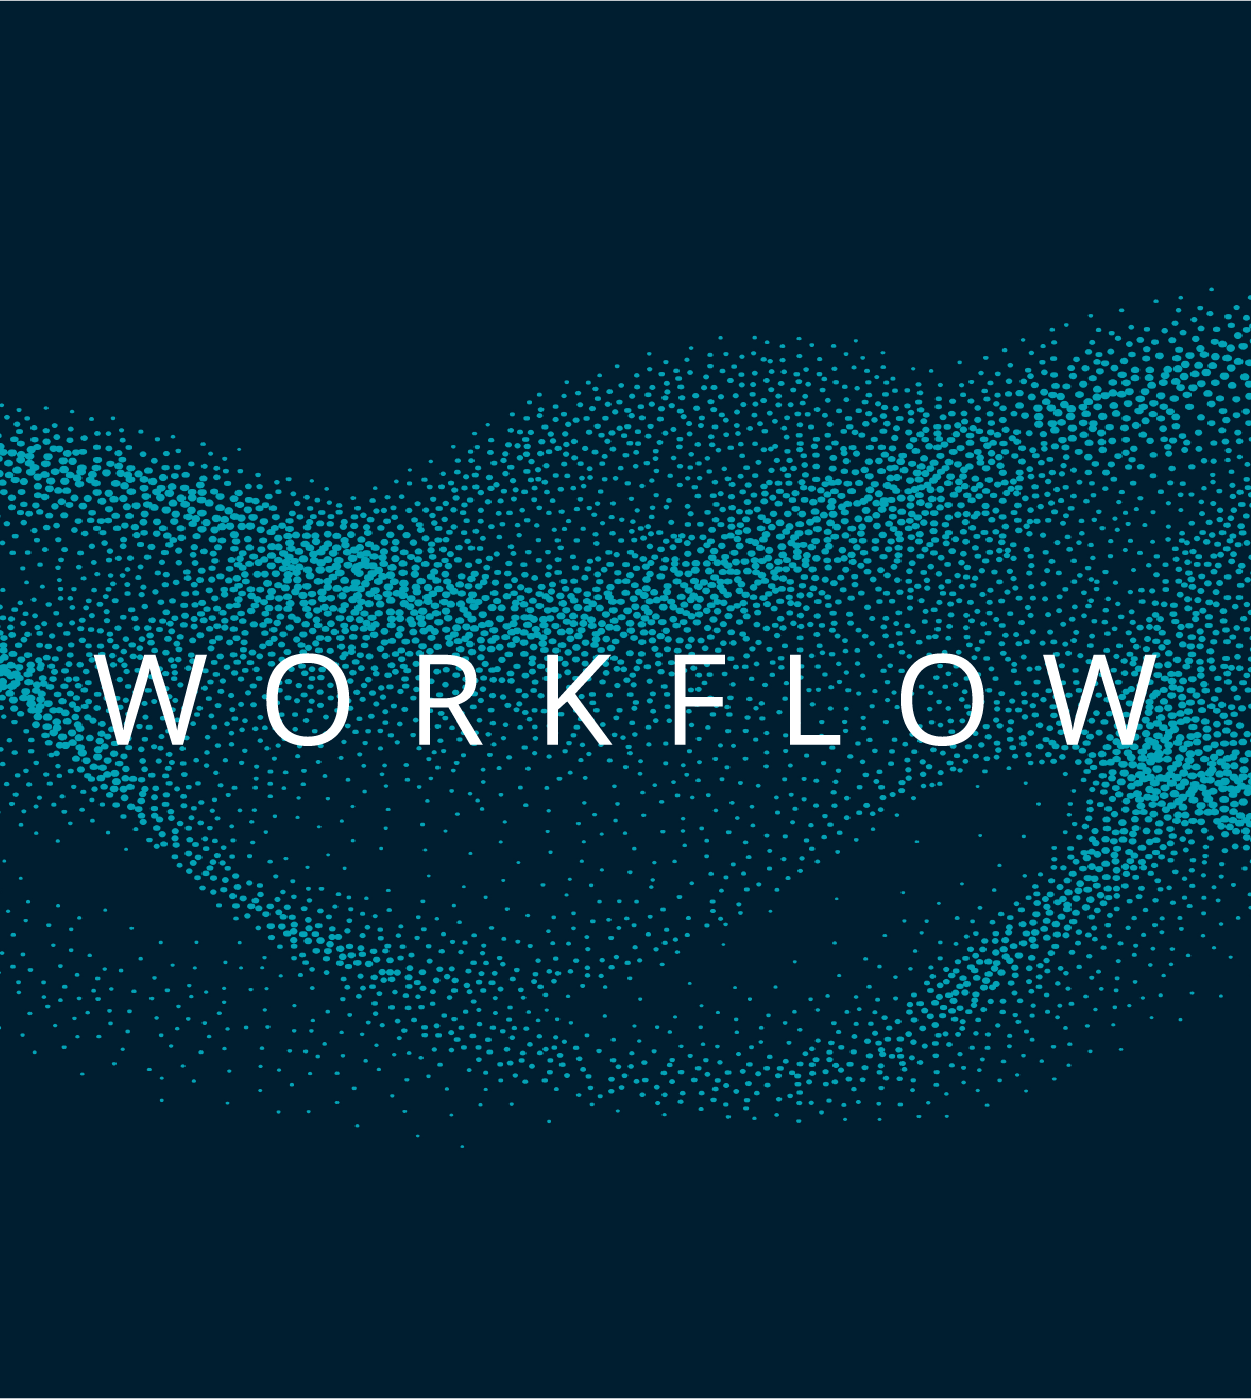 White text reading "workflow" on a blue background containing a halftone design